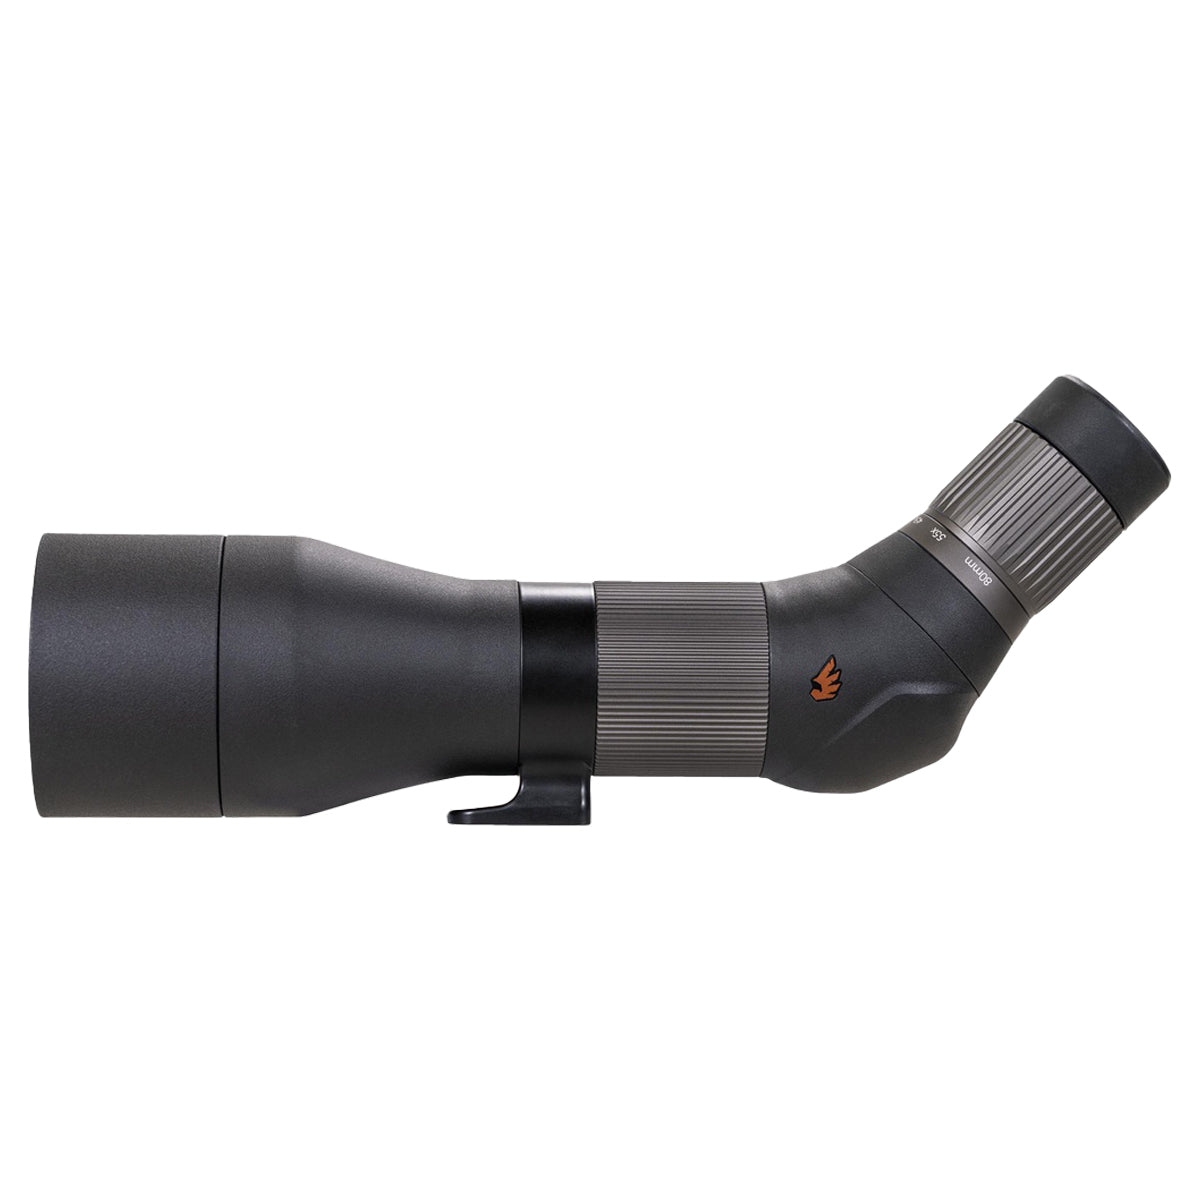 Gunwerks Revic Acura S80a Angled Spotting Scope in  by GOHUNT | Revic - GOHUNT Shop